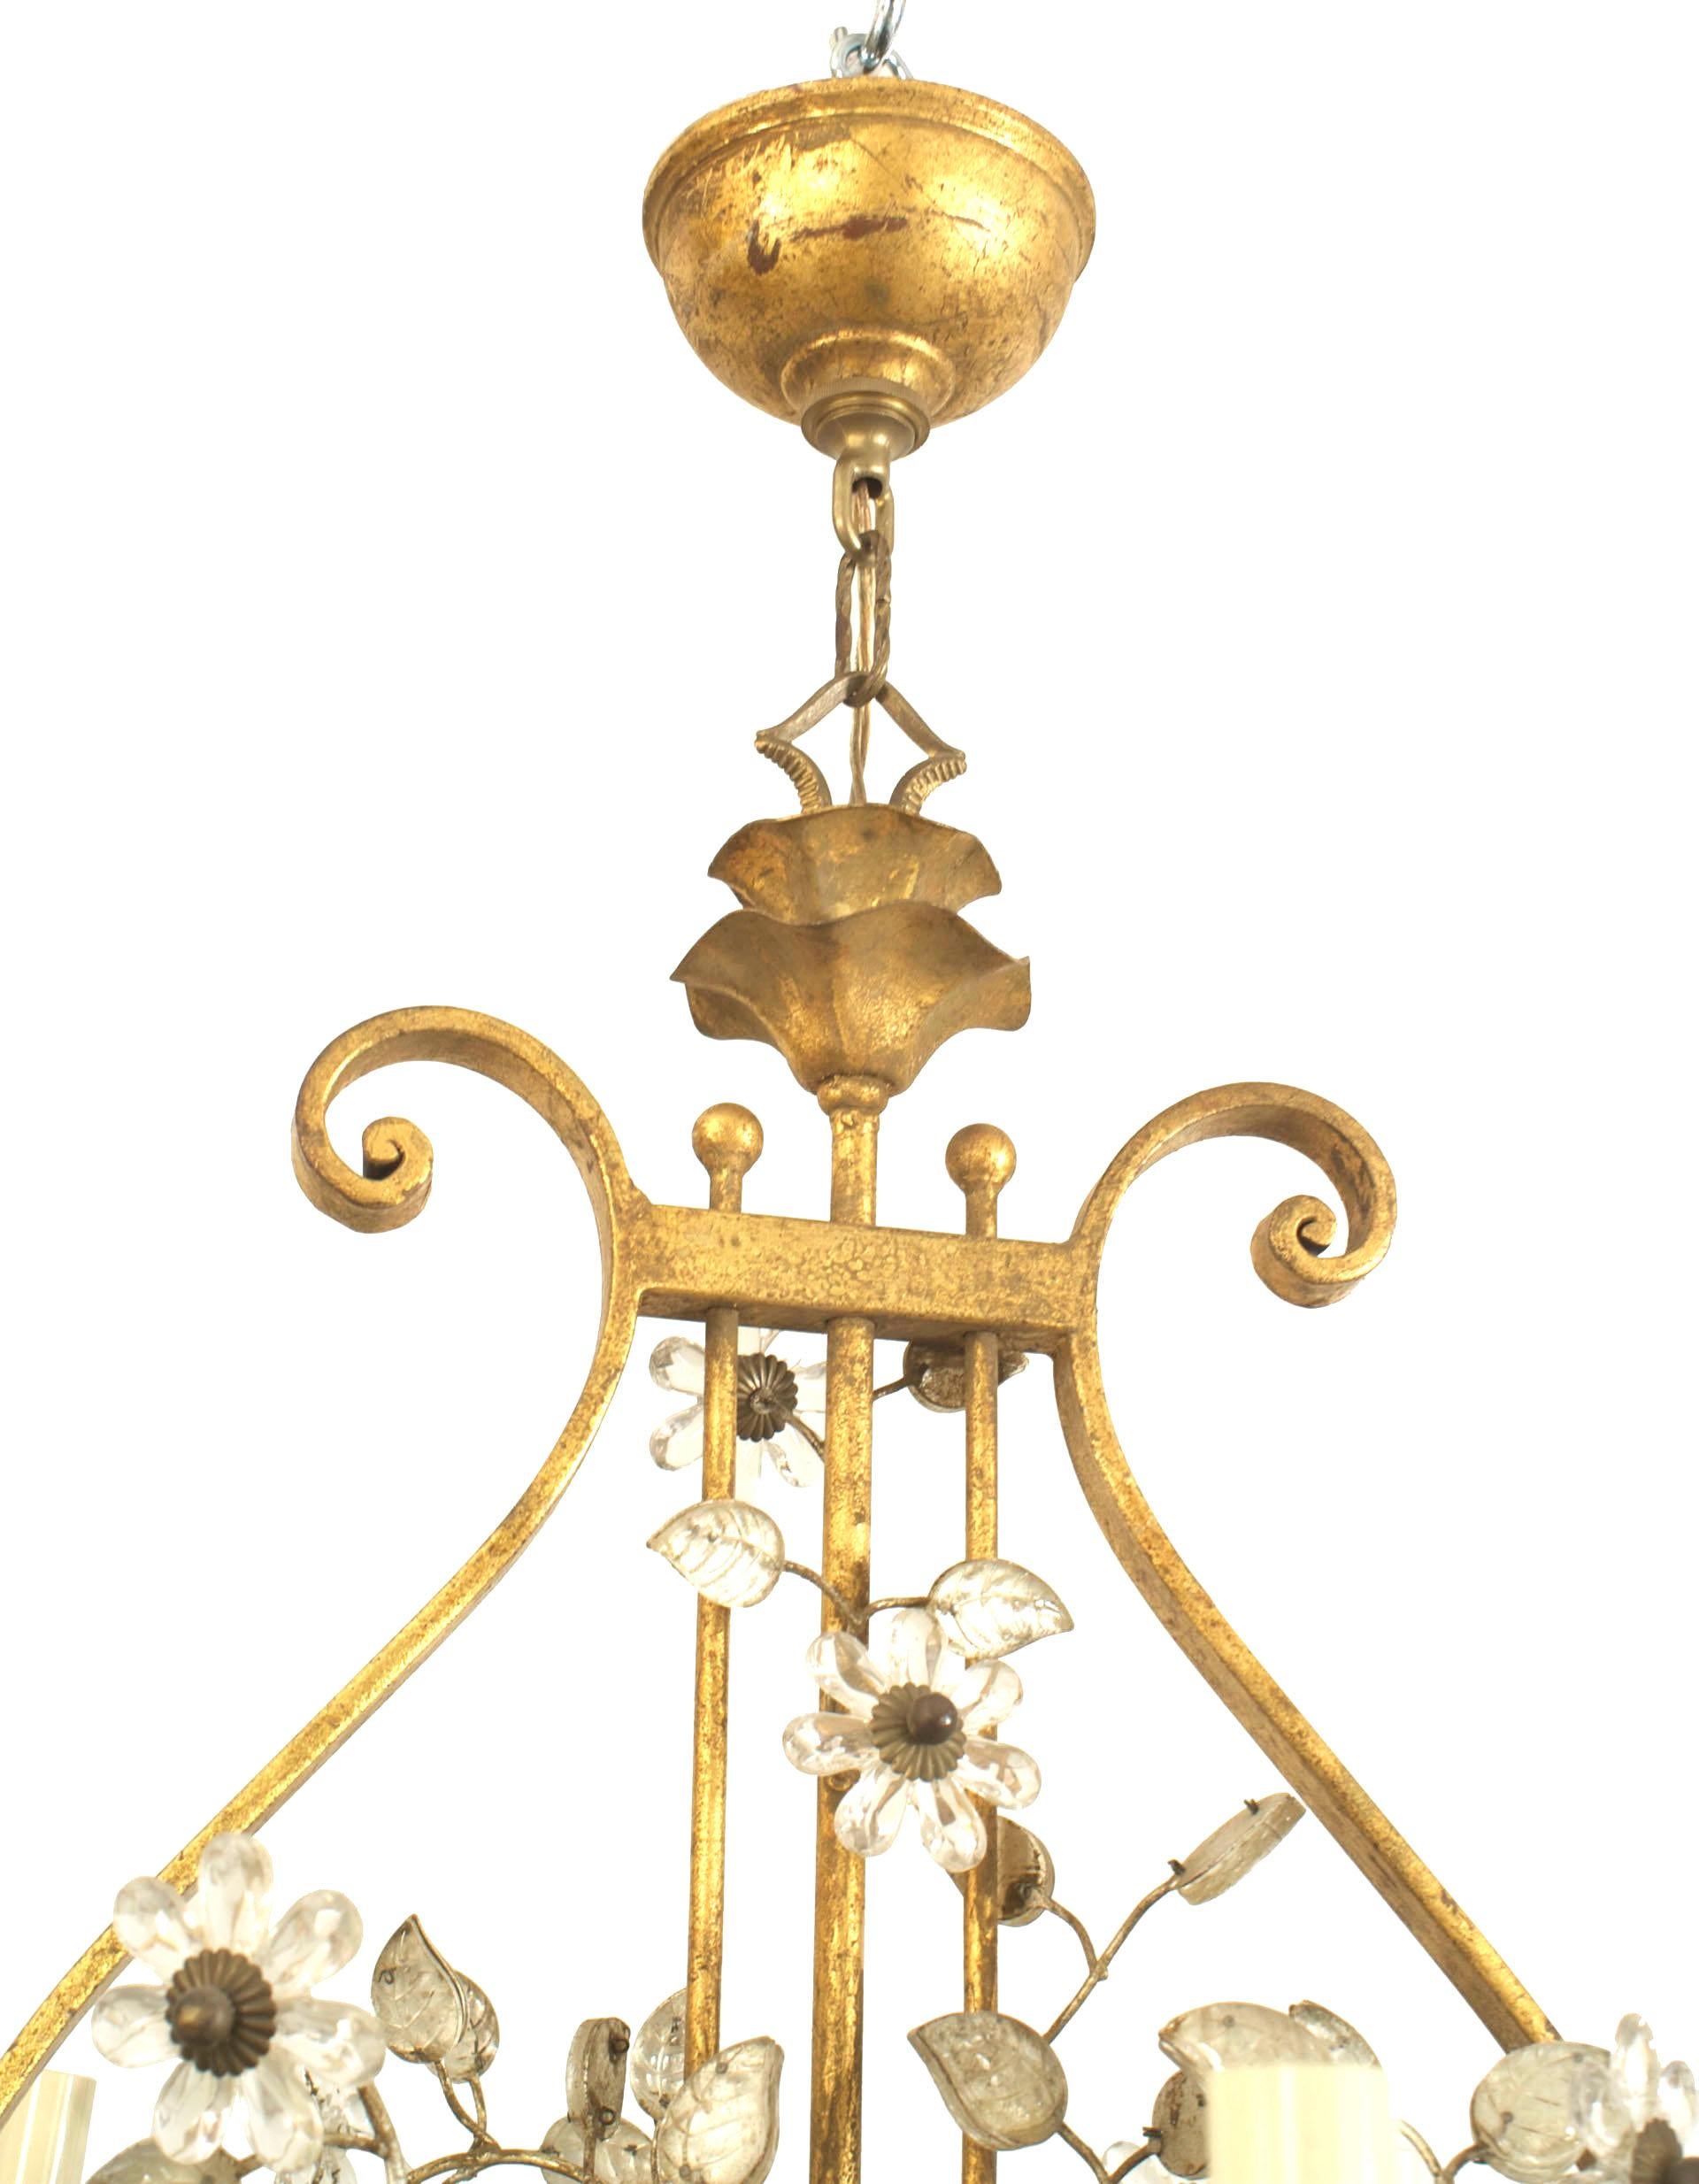 French (1940's) gilded iron chandelier with 6 scroll design arms emanating from a lyre form center and surrounded by silver gilt glass leaves & flowers with a frosted glass bottom shade. (by BAGUES)
